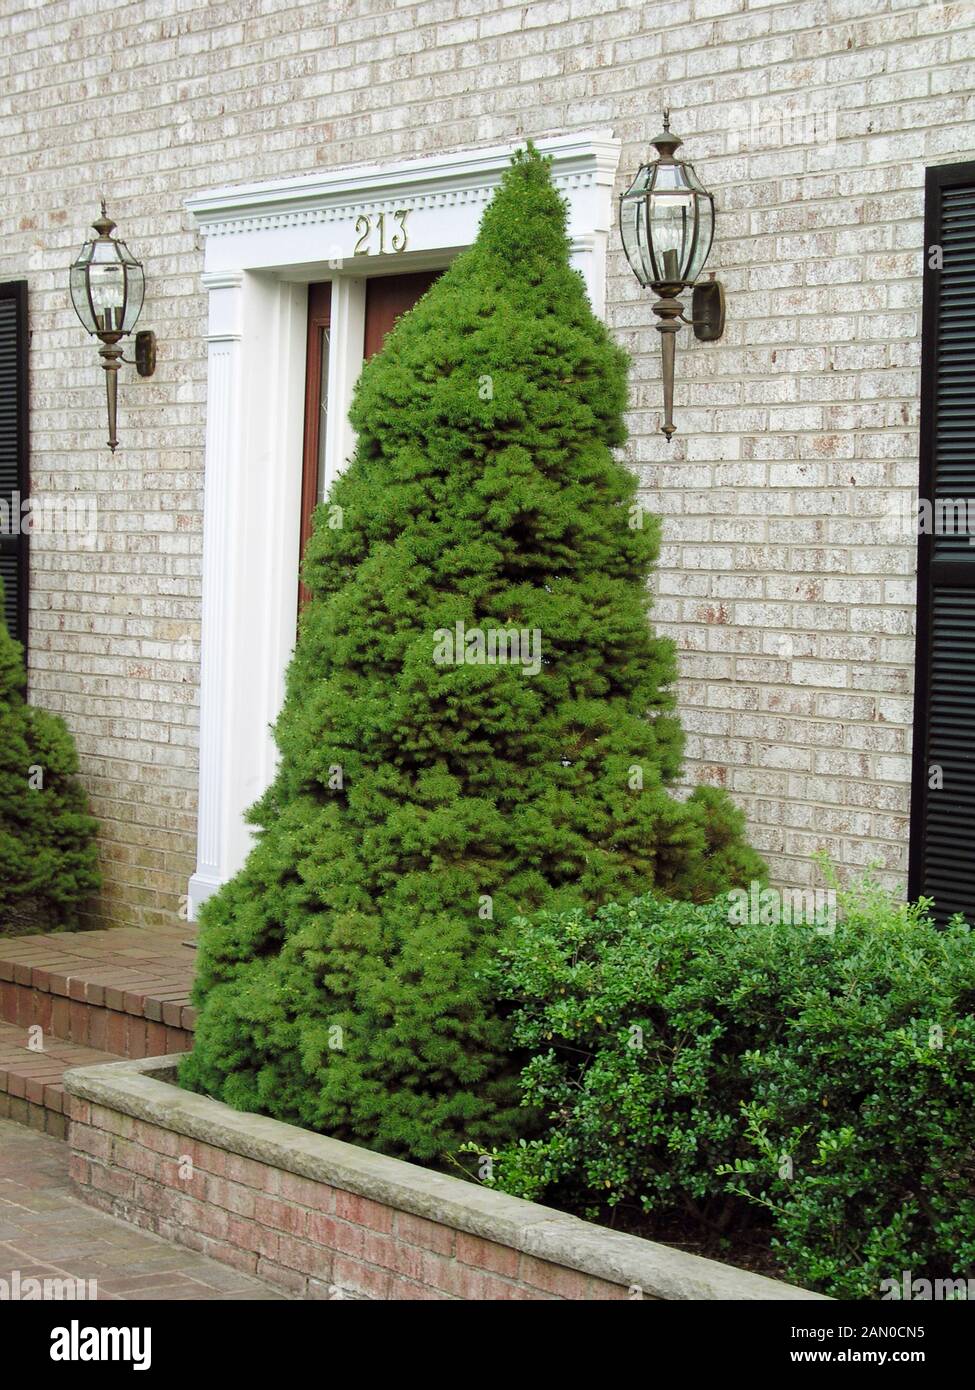 PICEA GLAUCA ALBERTINA CONICA AGAINST WALL BY FRONT DOOR Stock Photo